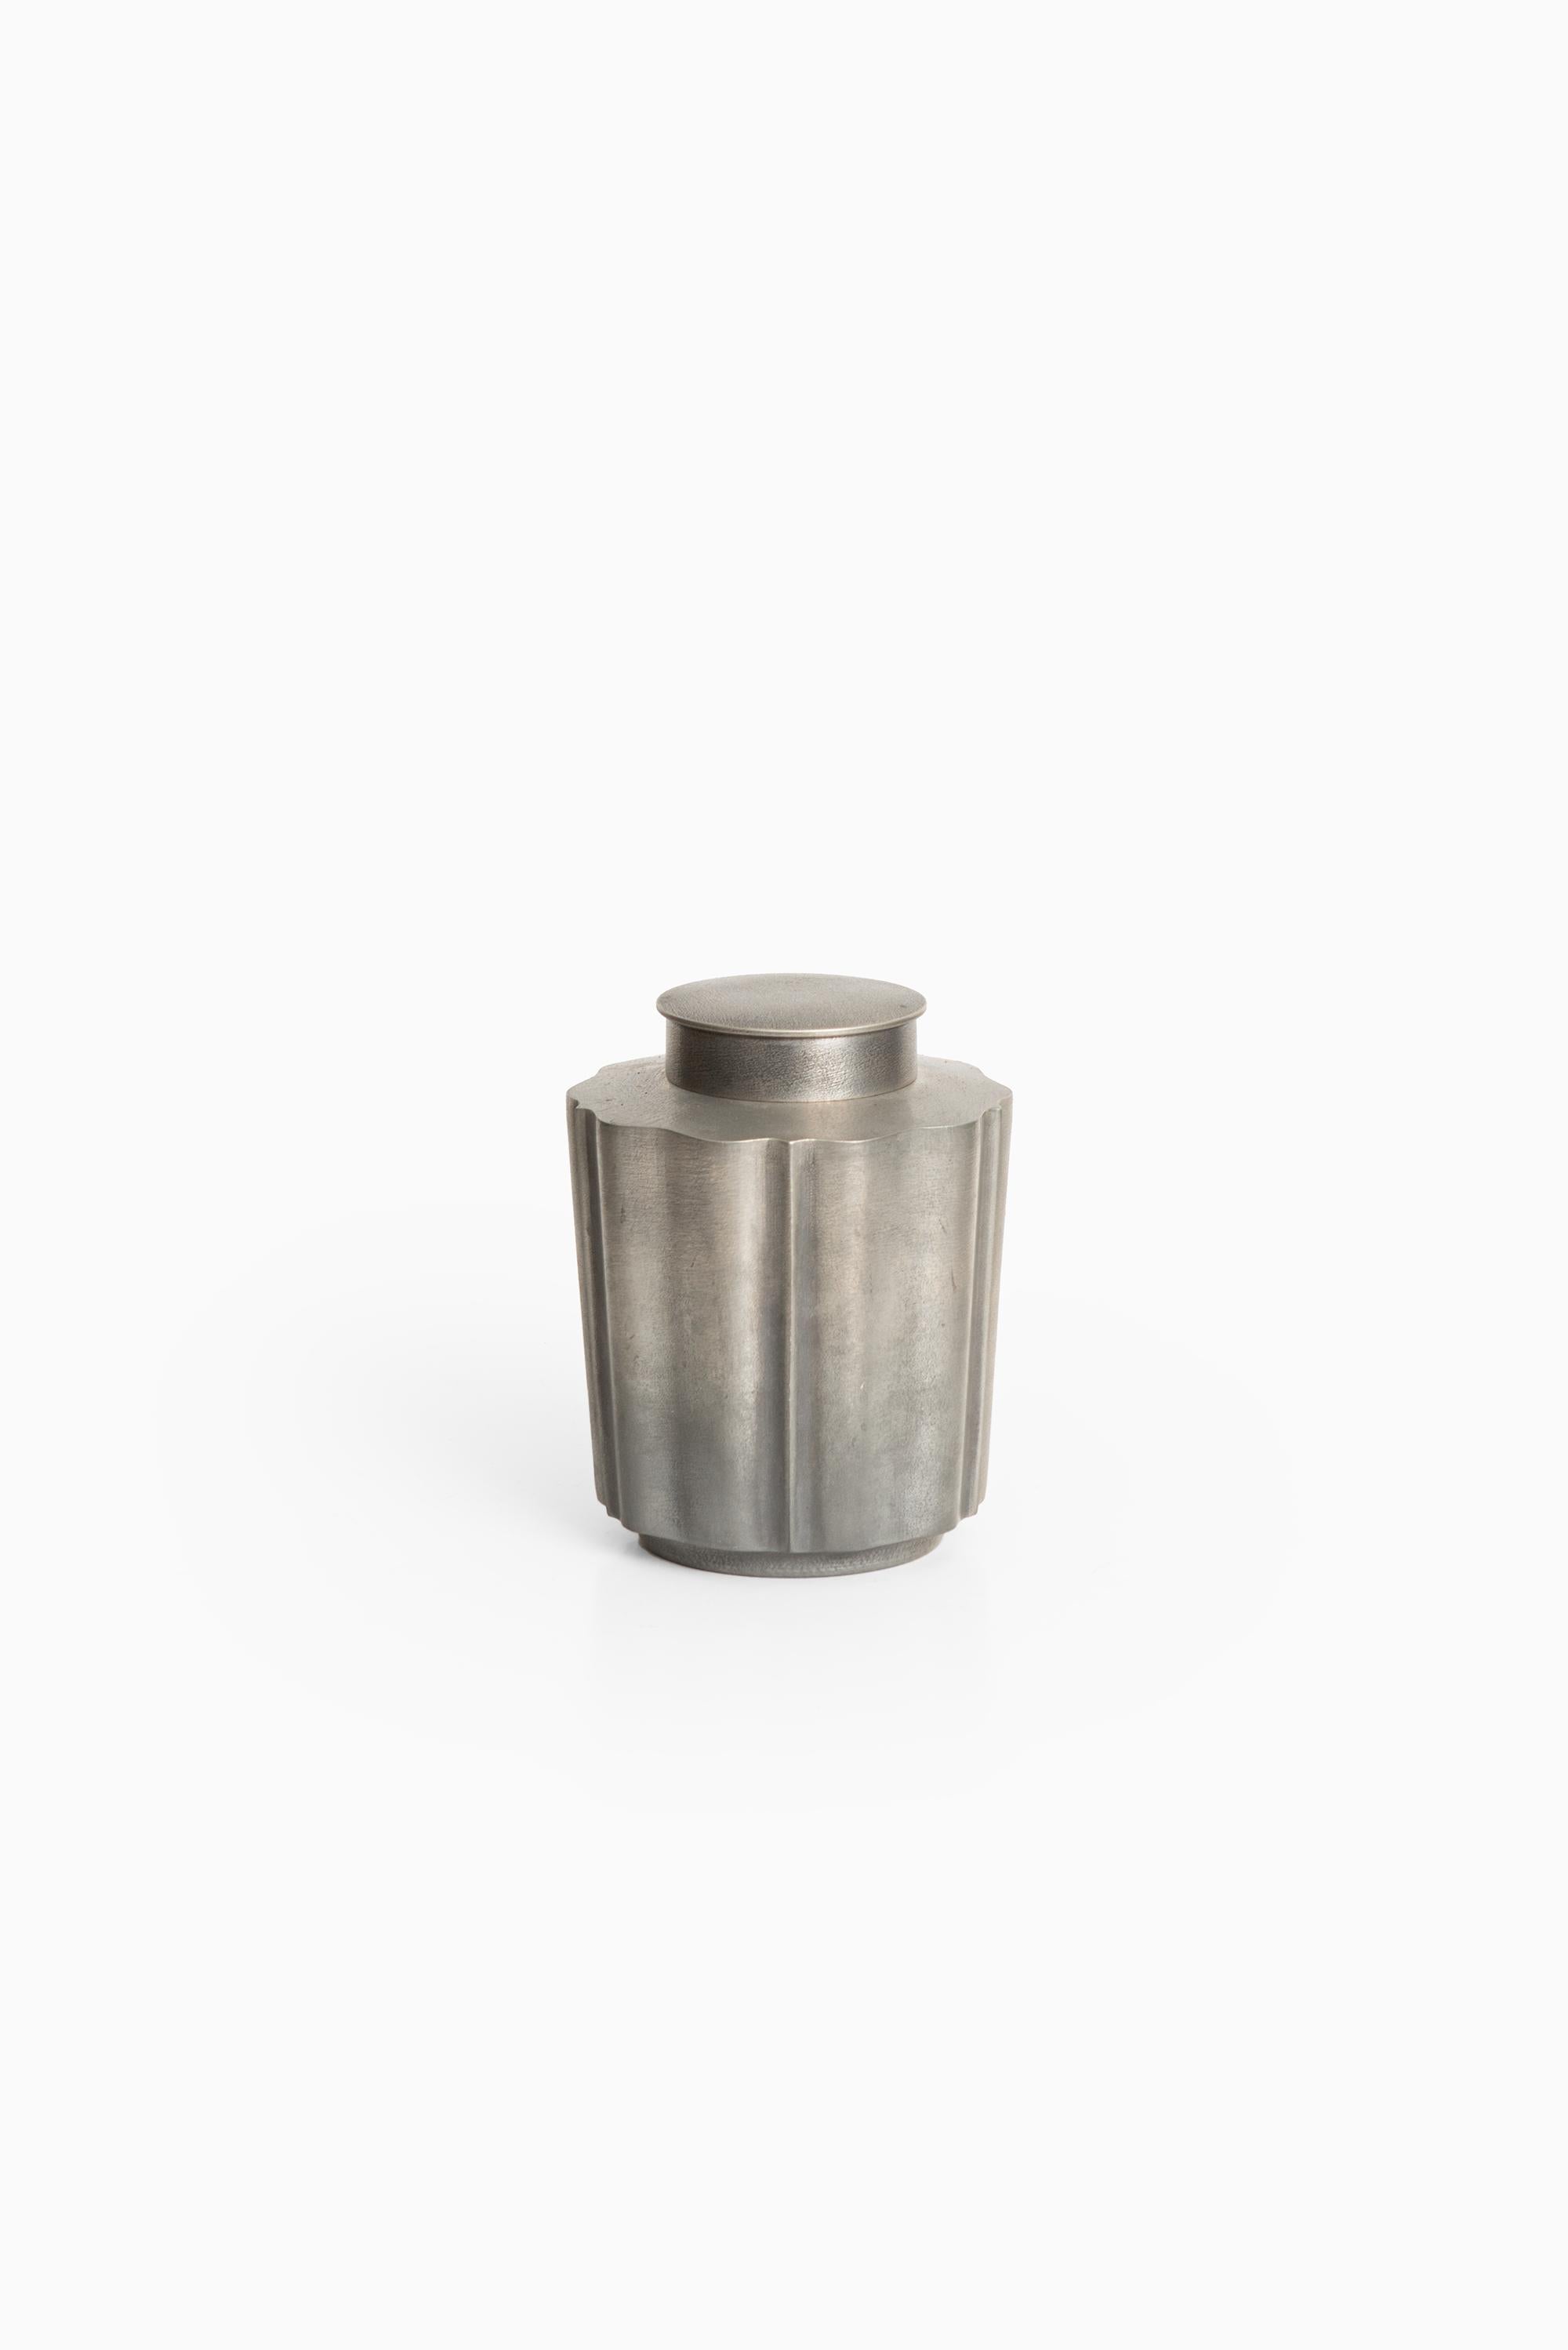 Swedish Edvin Ollers Jar with Lid in Pewter Produced in Sweden